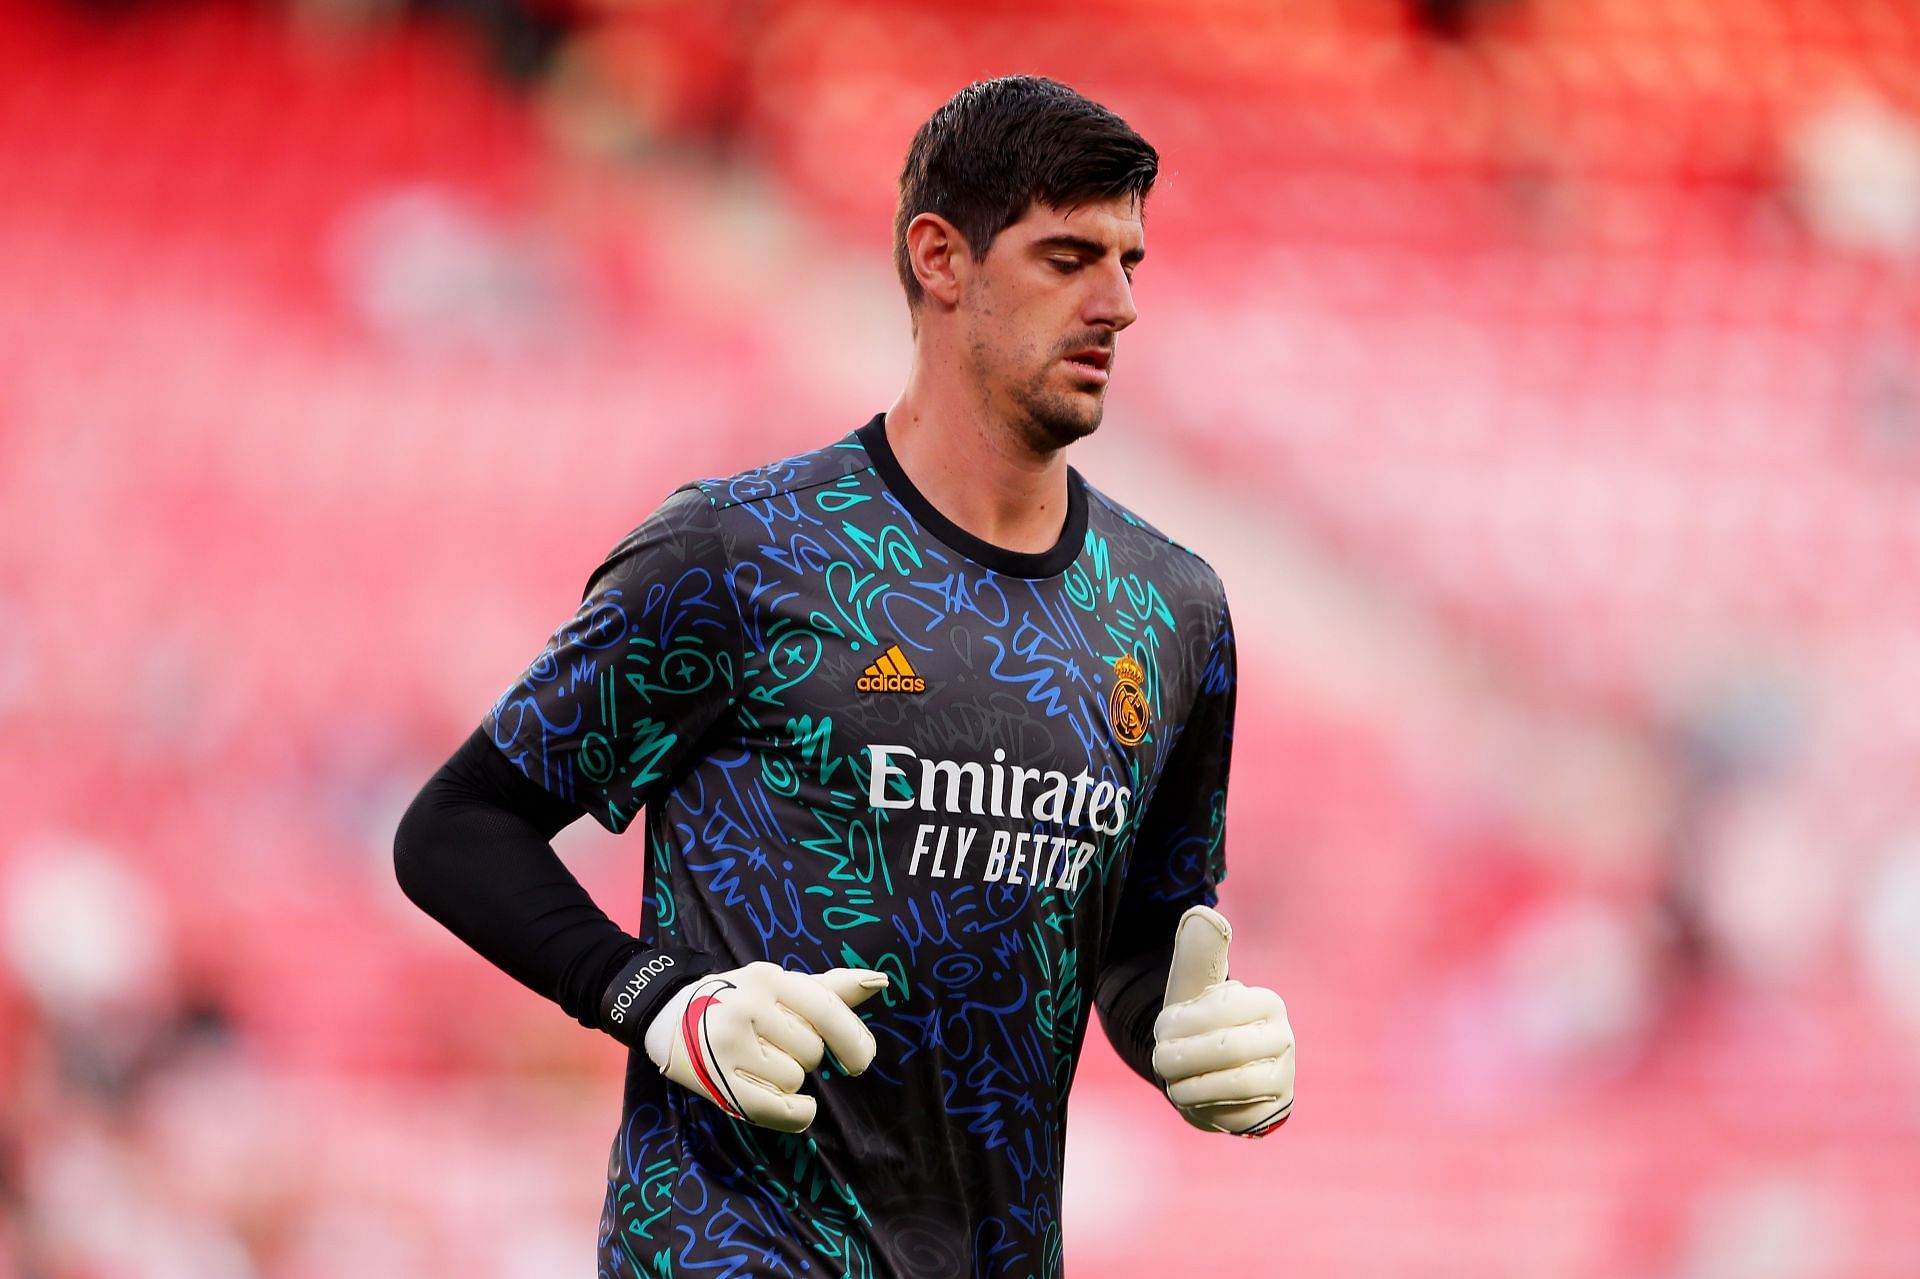 Thibaut Courtois has been excellent for his club